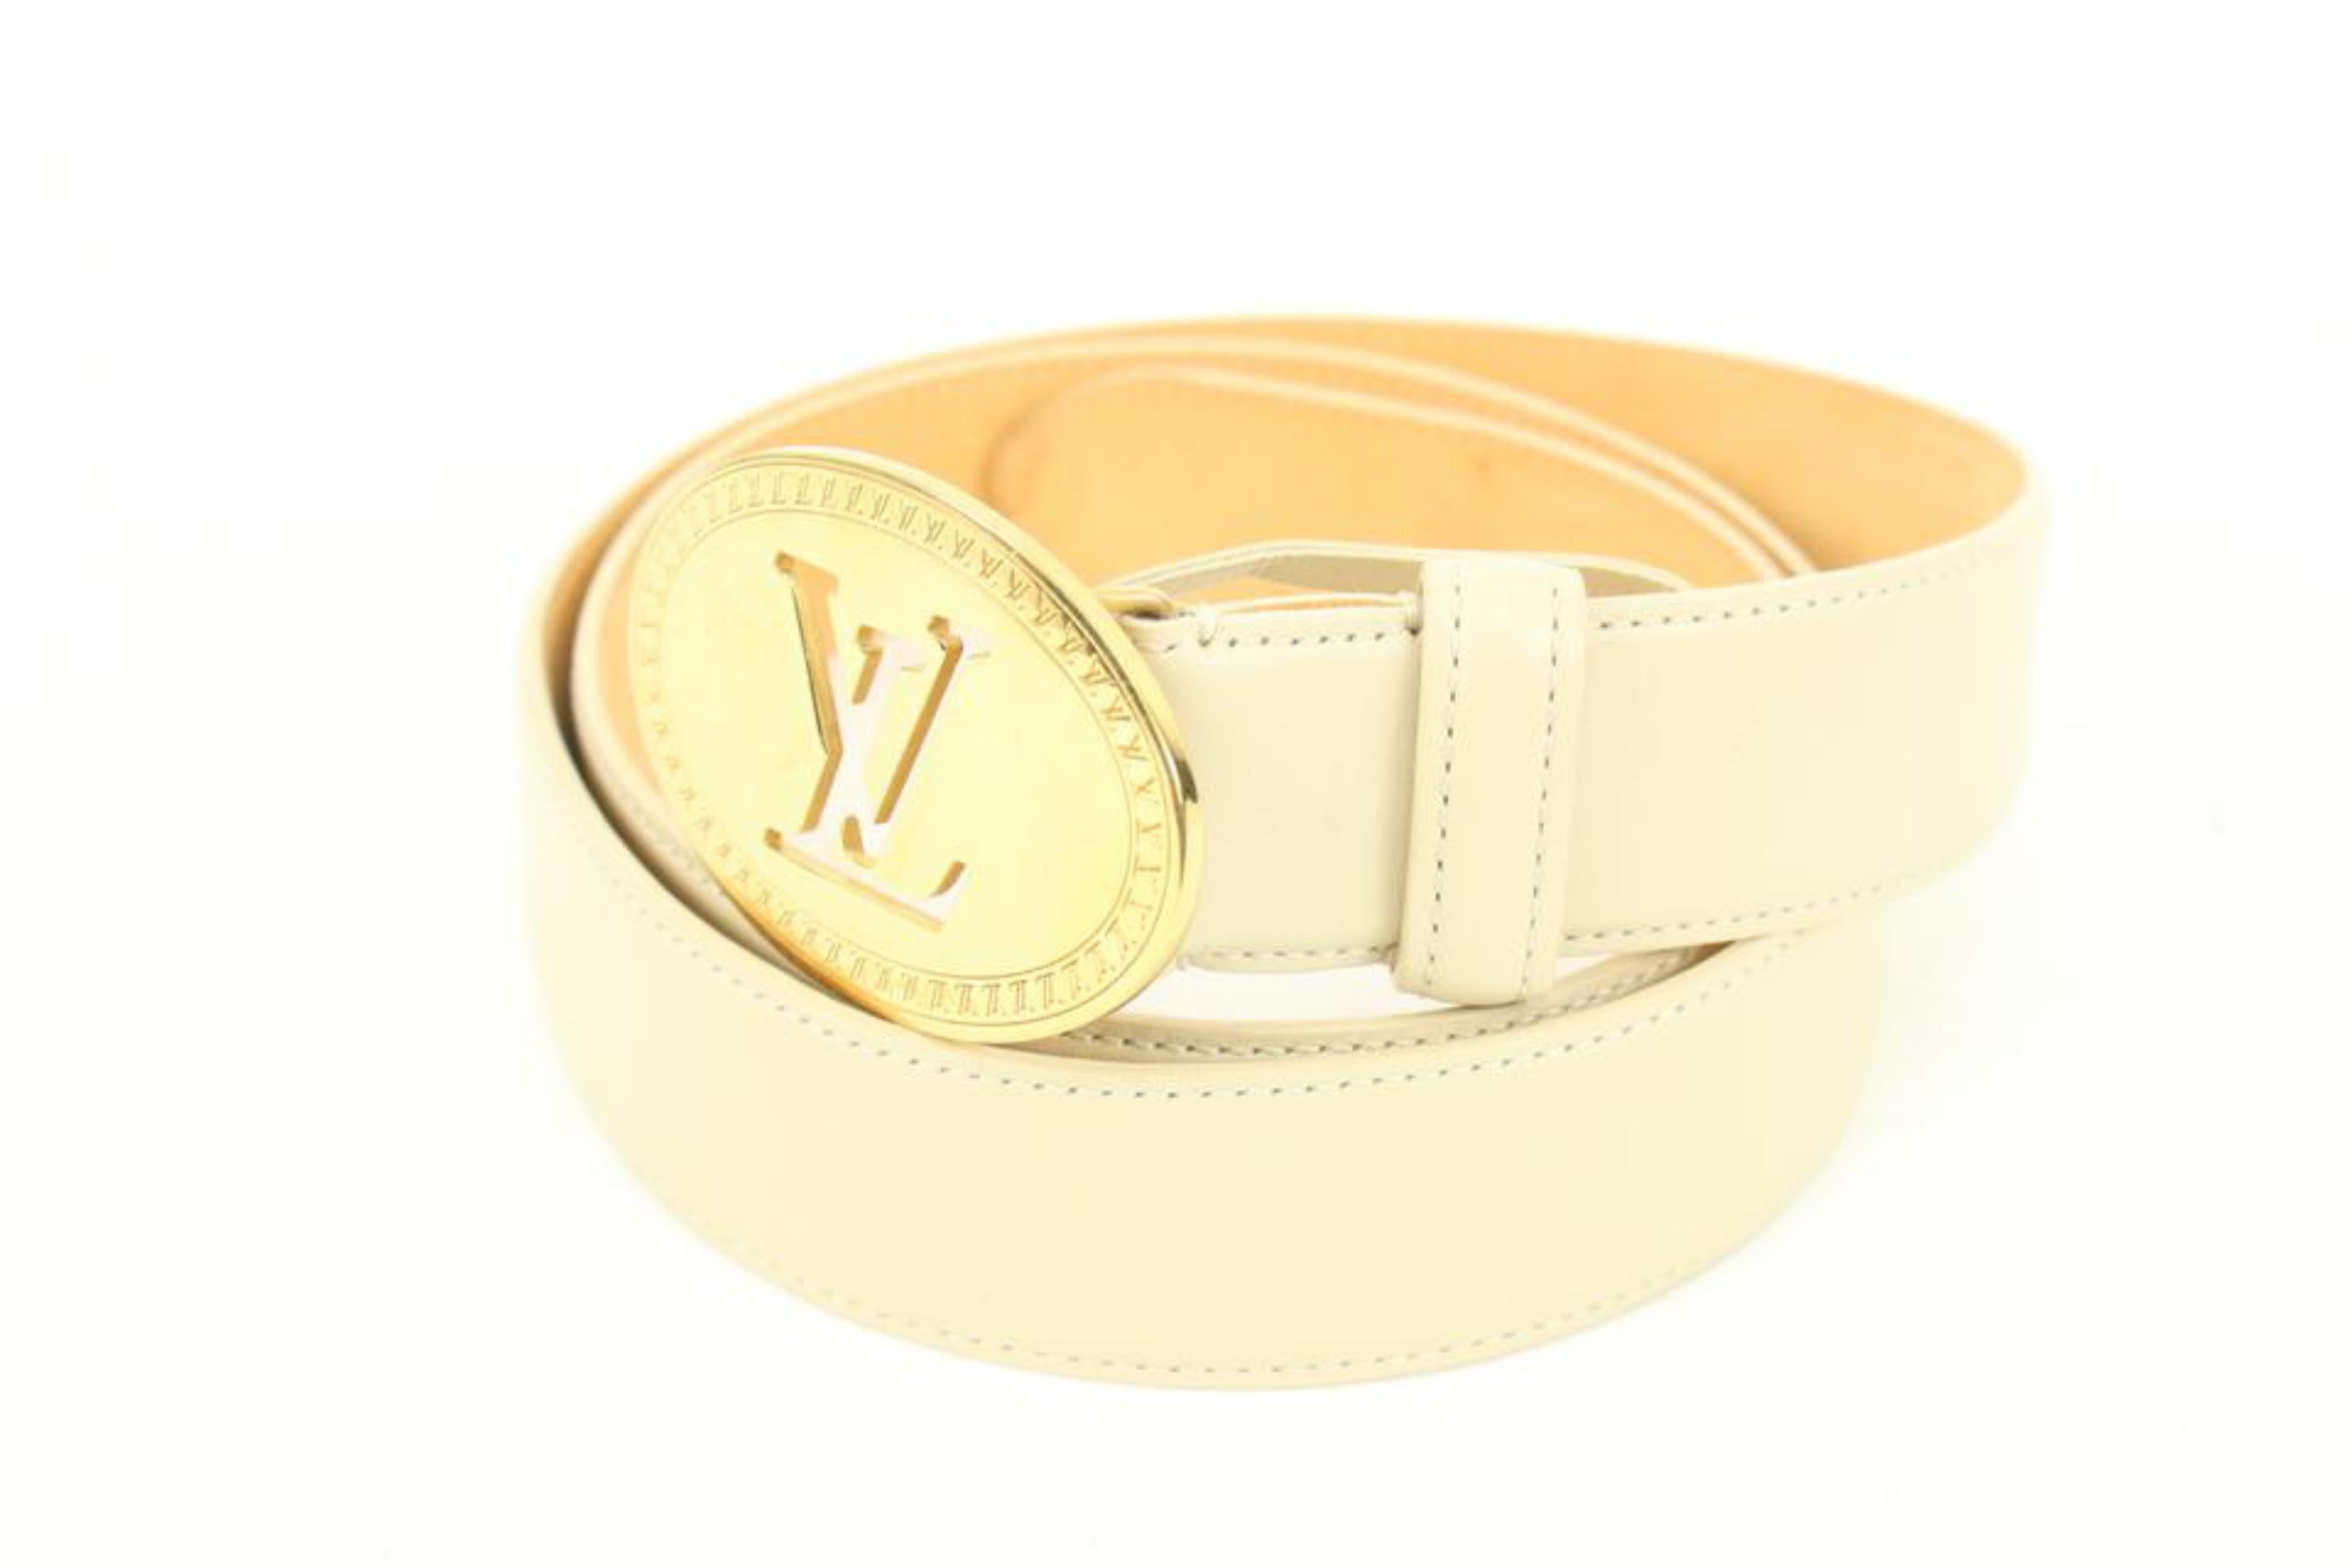 Louis Vuitton 90/36 Ivory x Gold LV Cut Out Initials Belt 71lk328s
Date Code/Serial Number: CT0171
Made In: France
Measurements: Length:  42.5